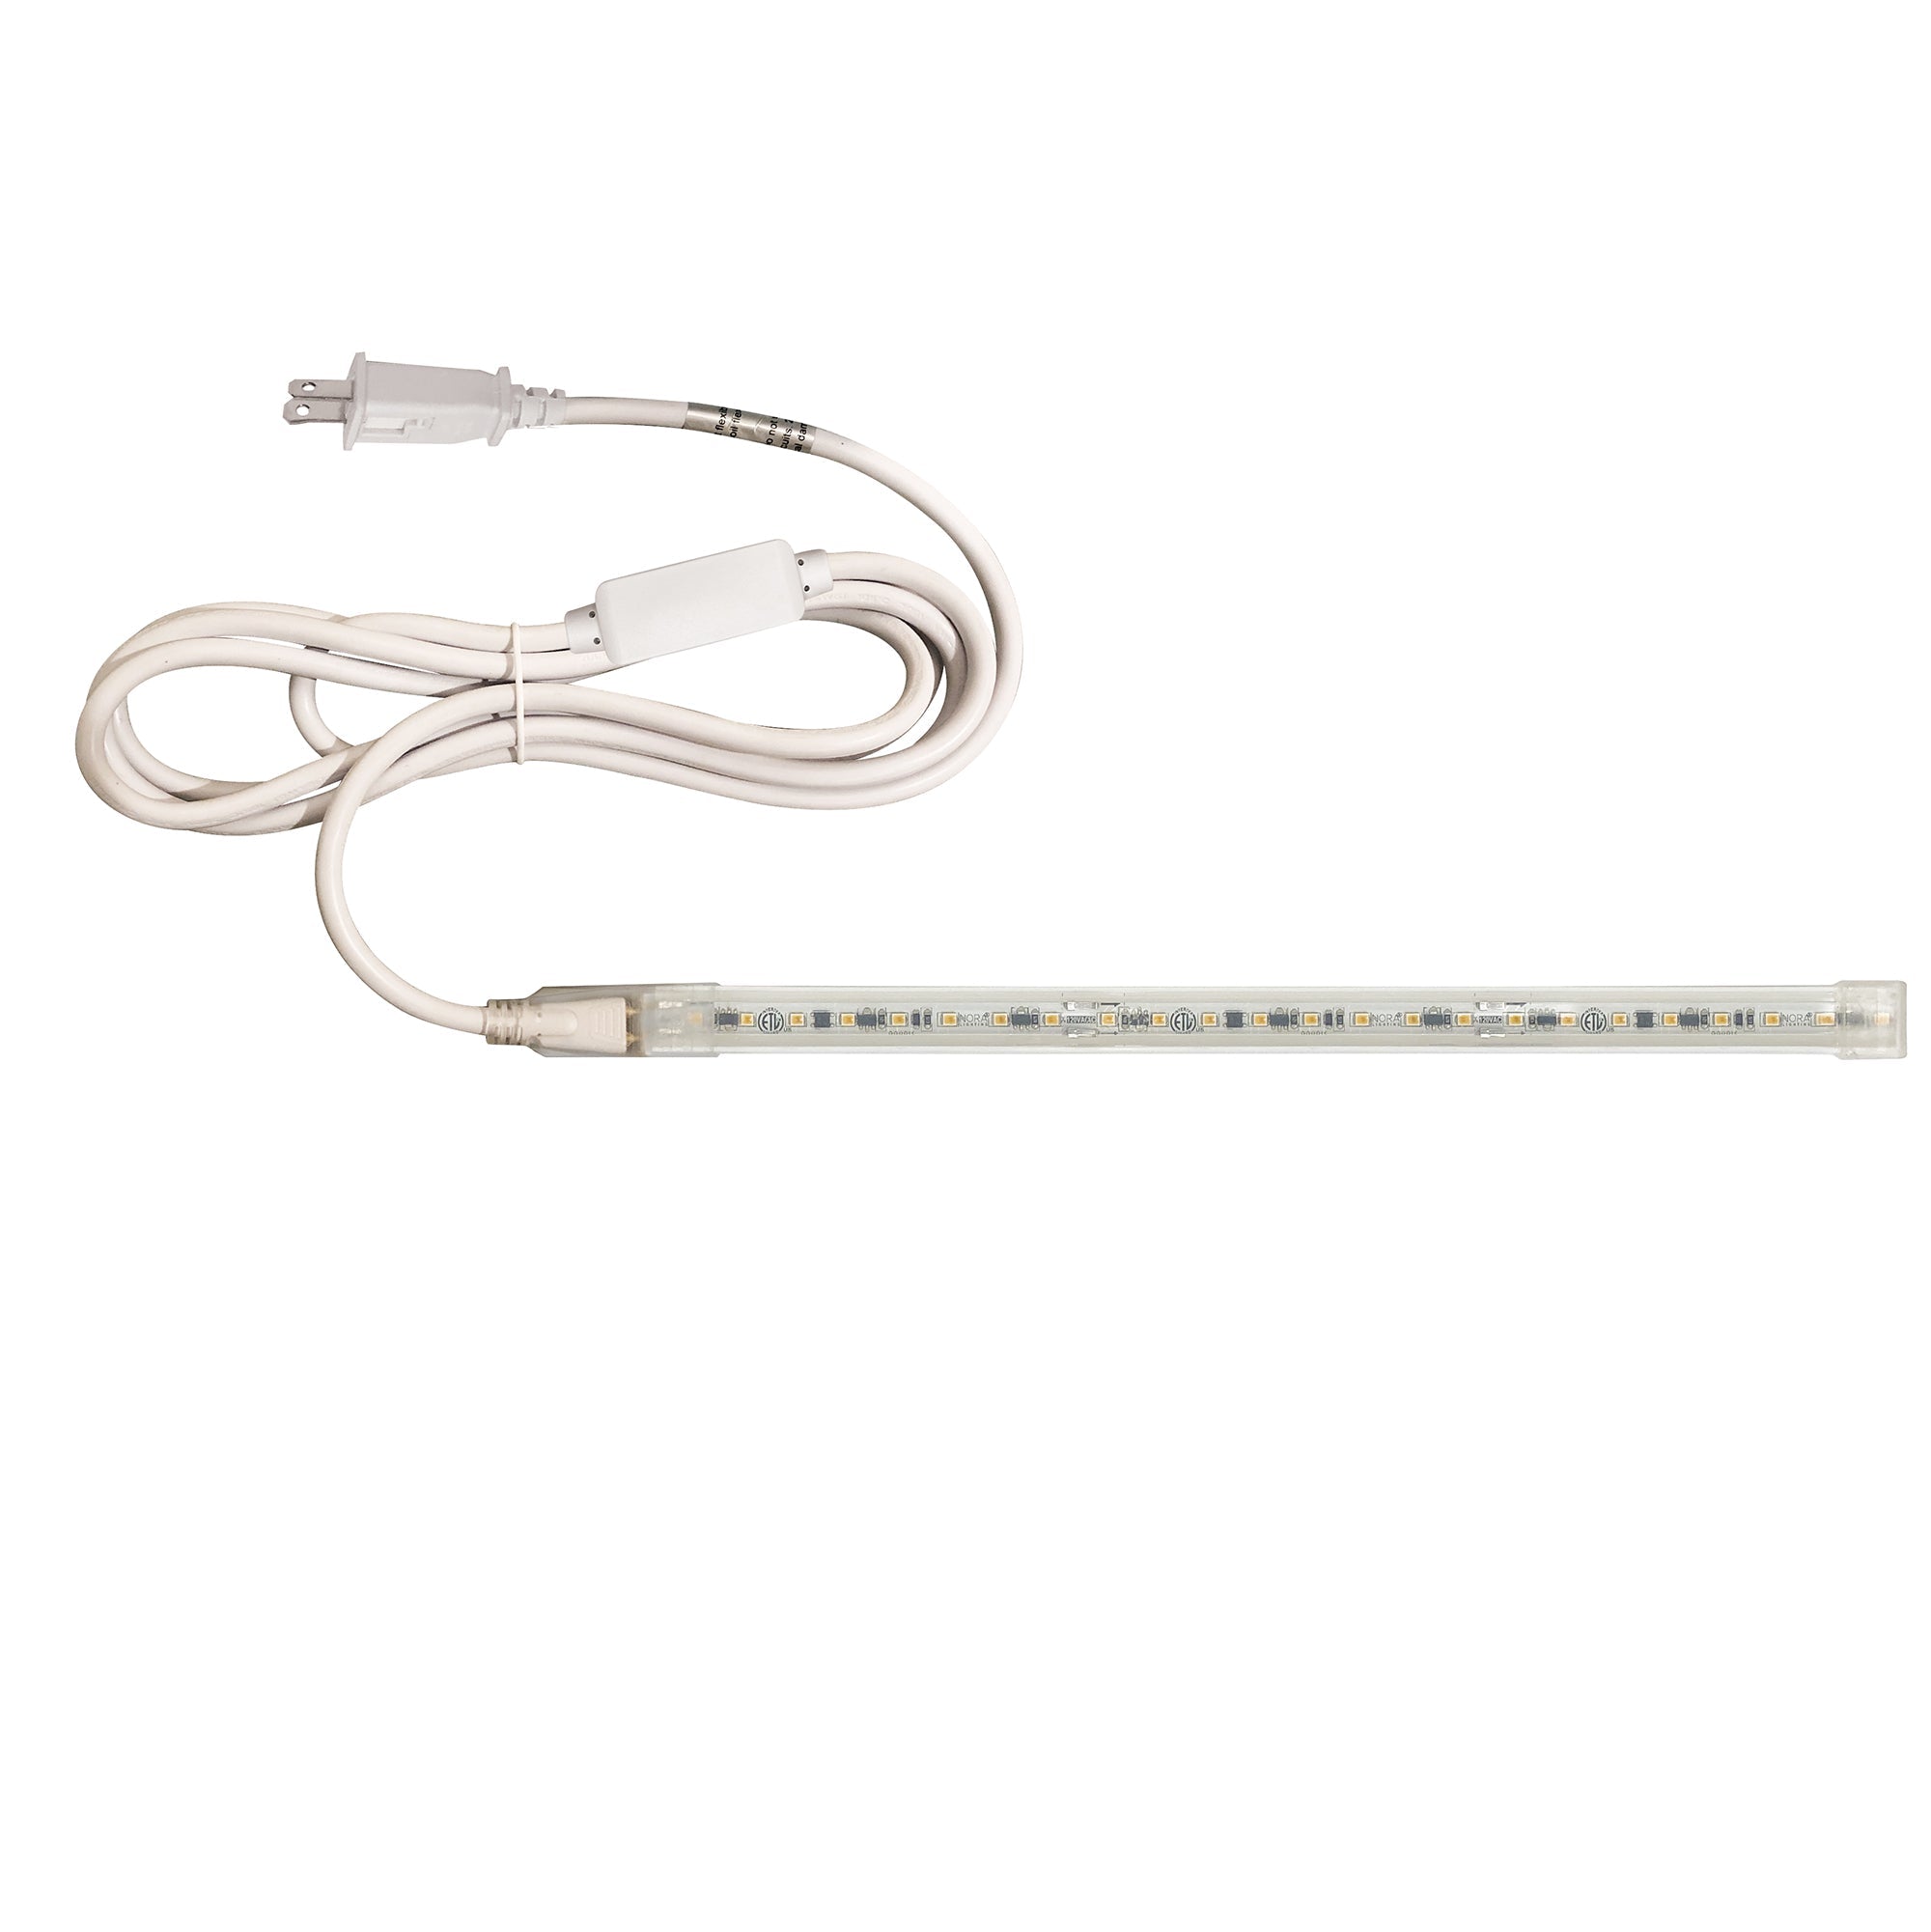 Nora Lighting NUTP13-W9-4-12-927/CPSP - Accent / Undercabinet - Custom Cut 9-ft, 4-in 120V Continuous LED Tape Light, 330lm / 3.6W per foot, 2700K, w/ Mounting Clips and 8' Cord & Plug w/ Surge Protector